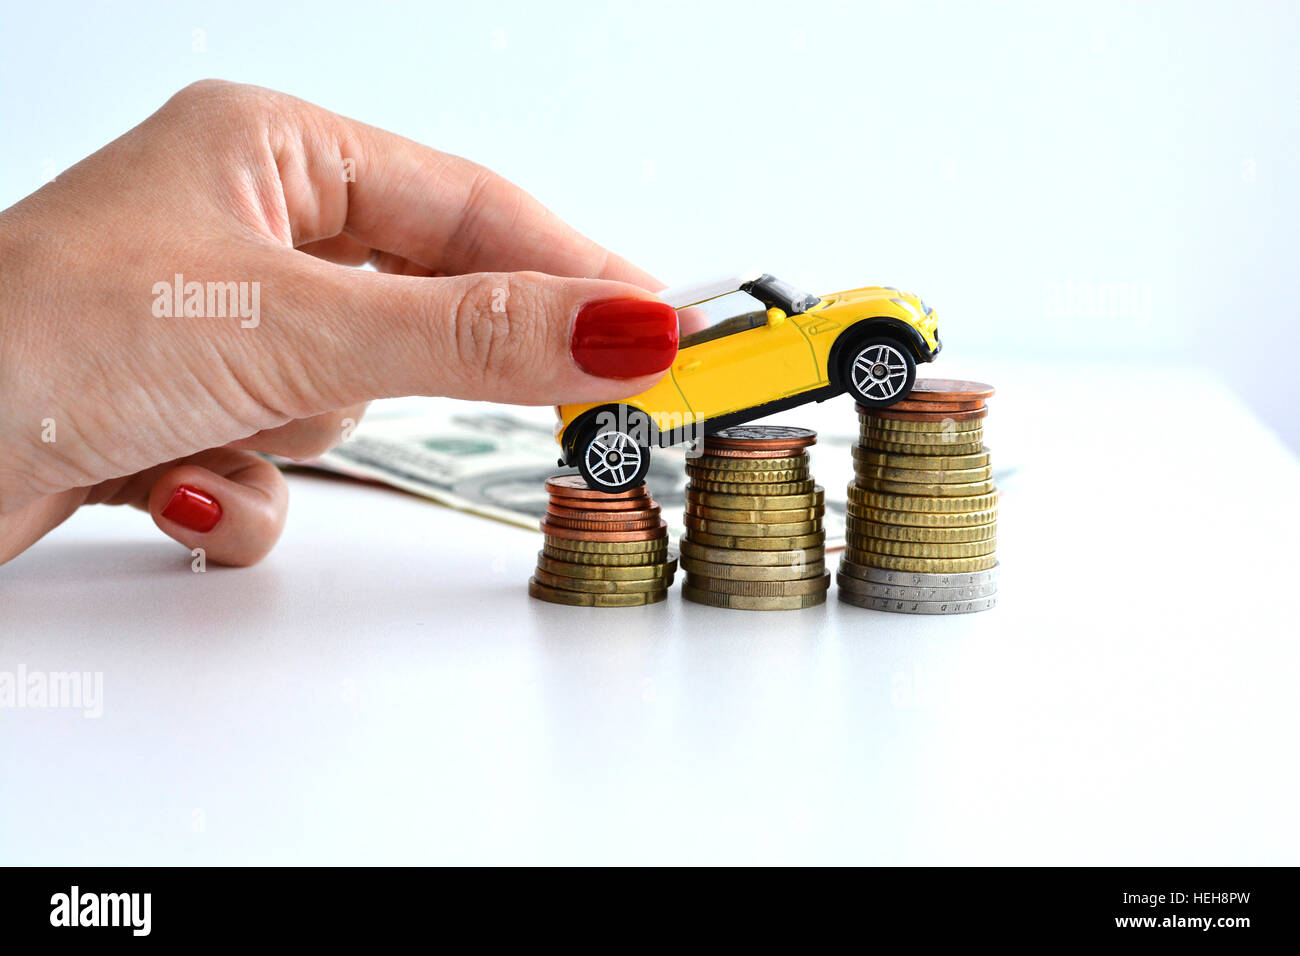 Woman hand pushing a toy car over a stack of coins Stock Photo